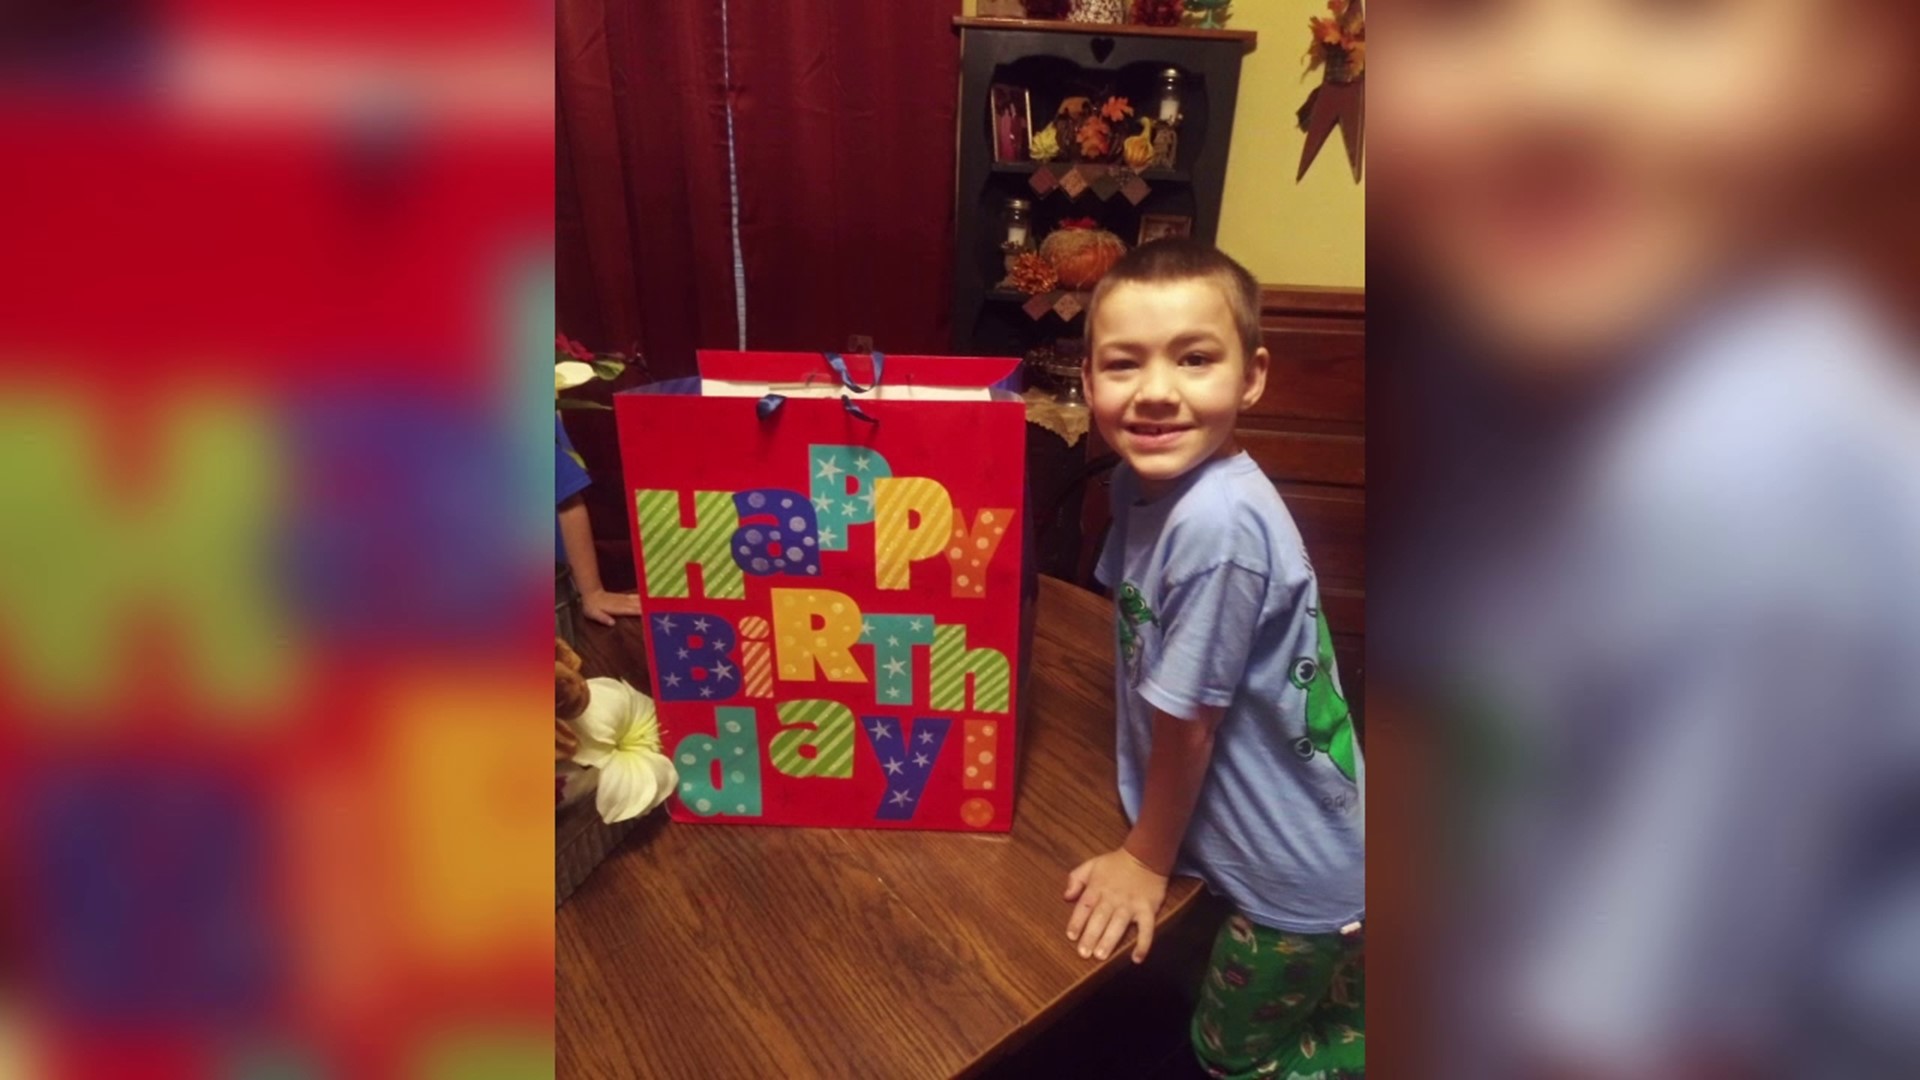 Almost a year since a 7-year-old boy was killed in a hit and run accident police in Luzerne County have finally identified the man they say was behind the wheel.